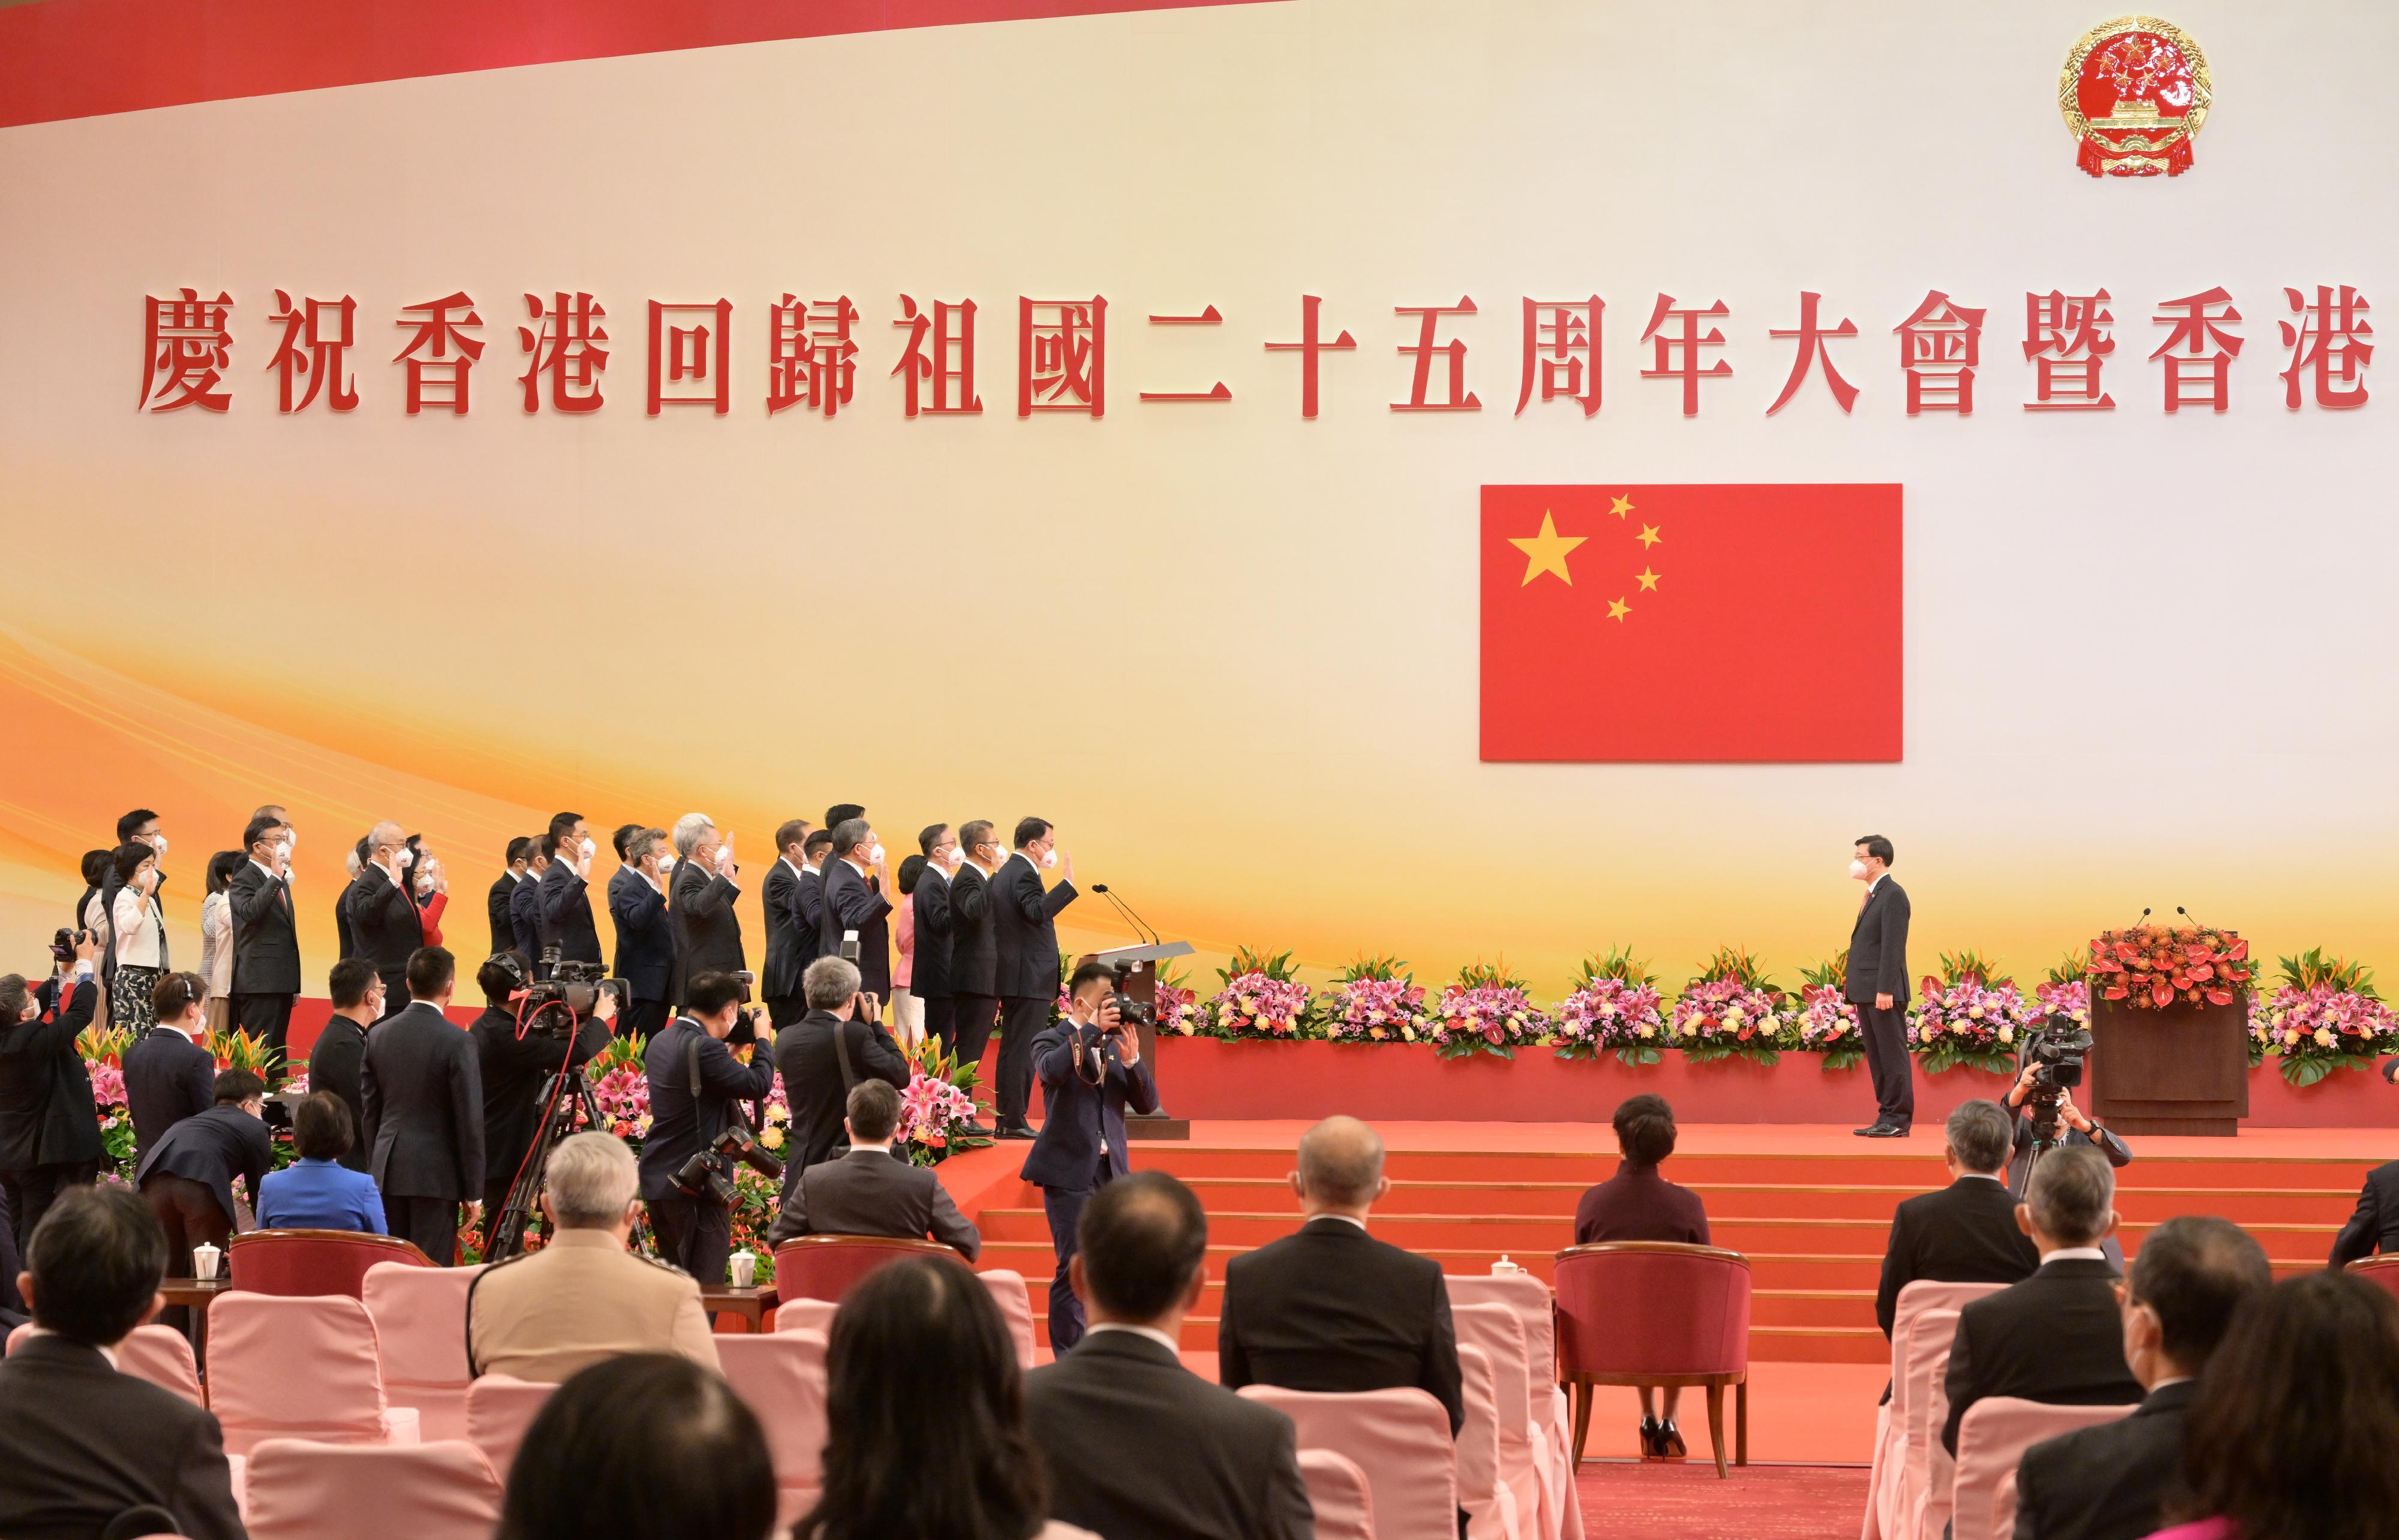 The Chief Executive, Mr John Lee (right), swears in members of the Executive Council at the Inaugural Ceremony of the Sixth-term Government of the Hong Kong Special Administrative Region at the Hong Kong Convention and Exhibition Centre this morning (July 1).